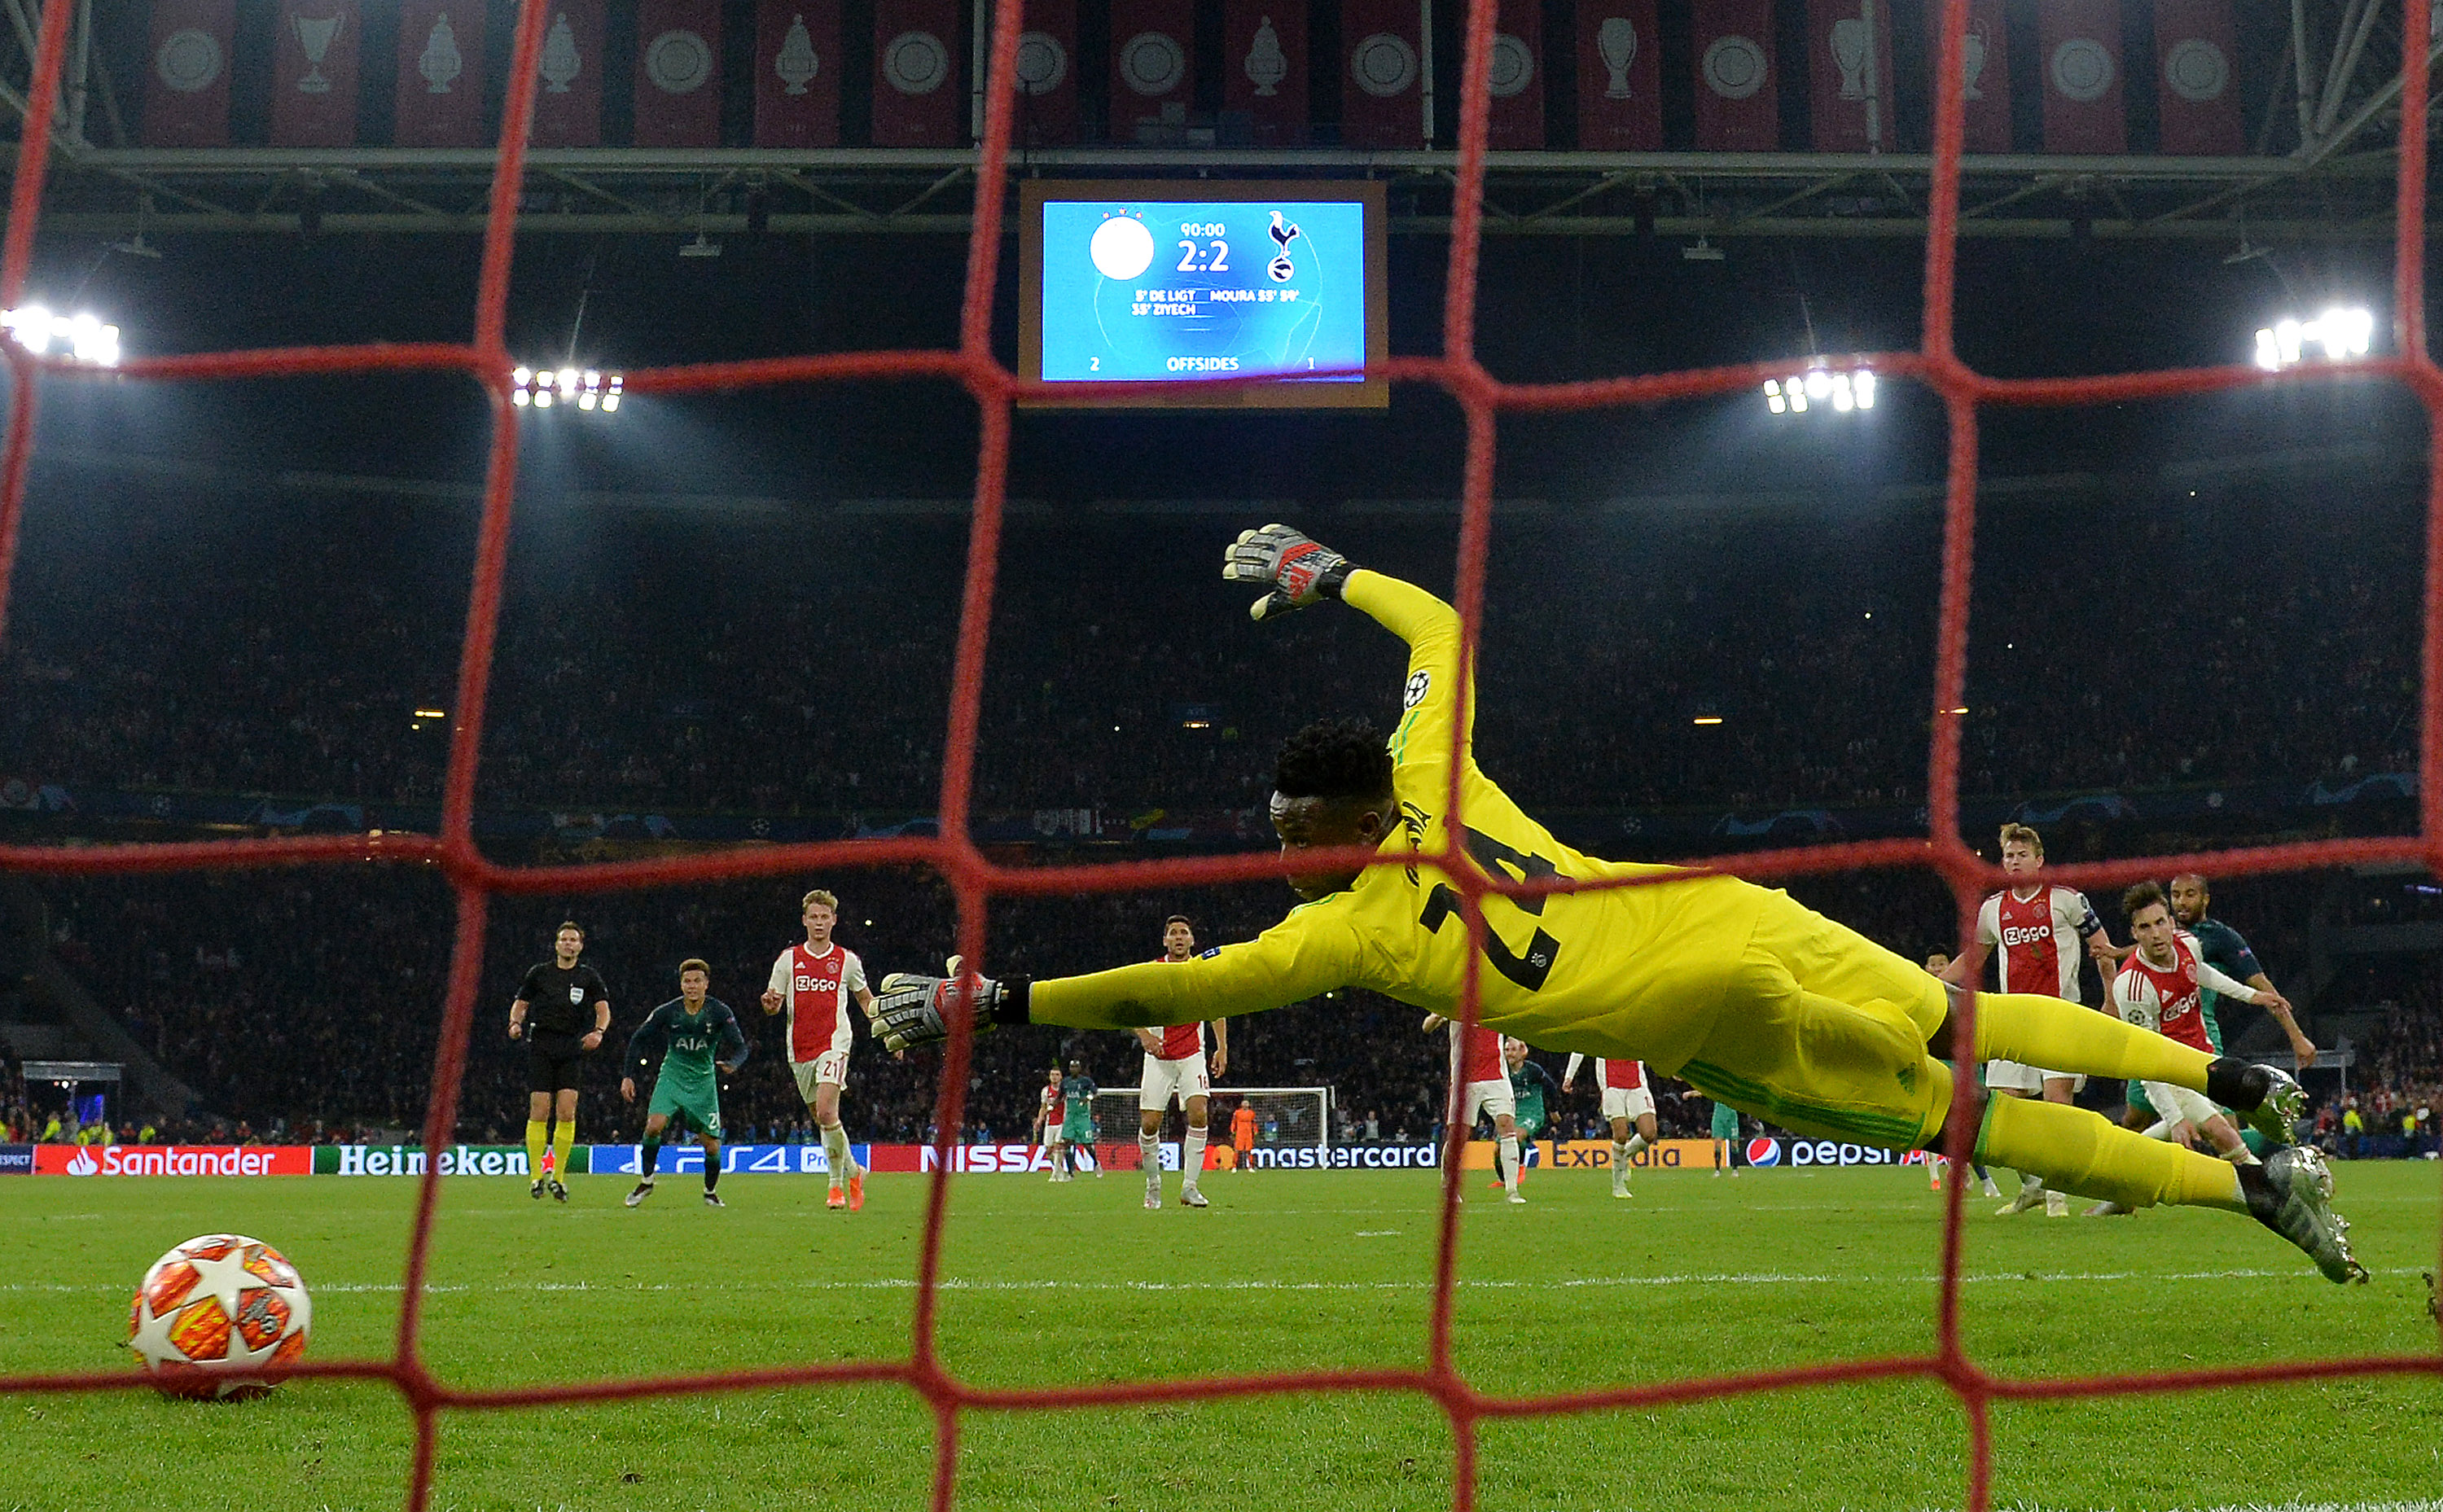 AMSTERDAM, NETHERLANDS - MAY 08: Andre Onana of Ajax dives as Lucas Moura of Tottenham Hotspur (obscure) scores his team's third goal during the UEFA Champions League Semi Final second leg match between Ajax and Tottenham Hotspur at the Johan Cruyff Arena on May 08, 2019 in Amsterdam, Netherlands. (Photo by Dan Mullan/Getty Images )